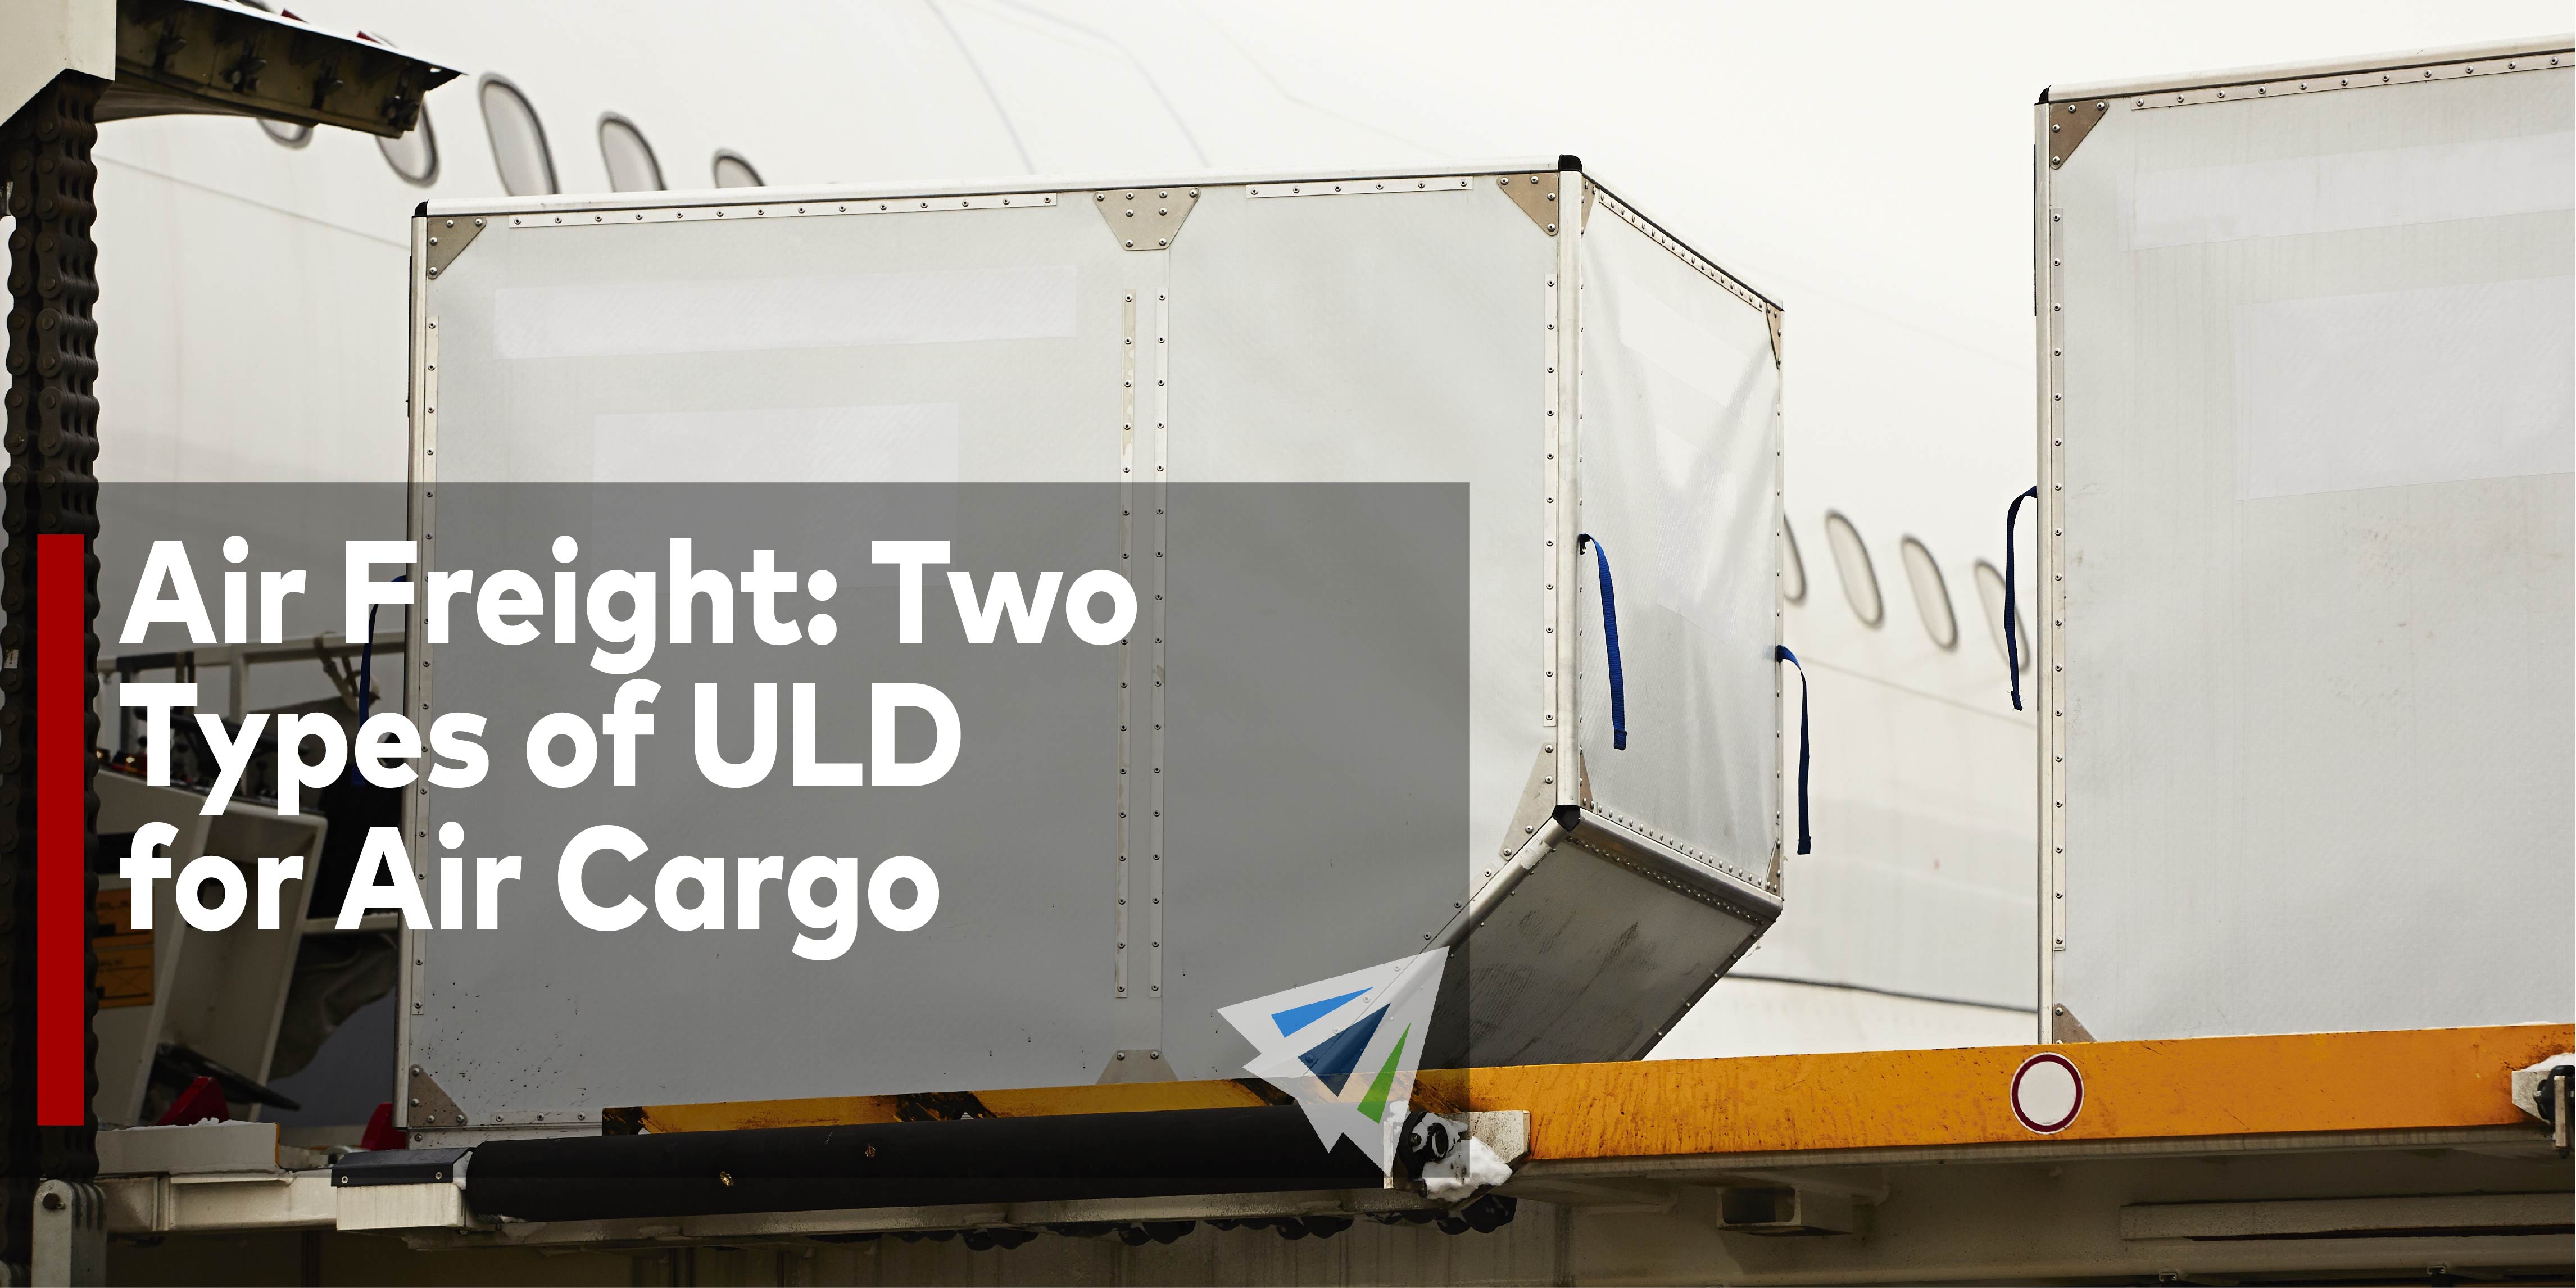 Air Freight- Two Types of ULD for Air Cargo